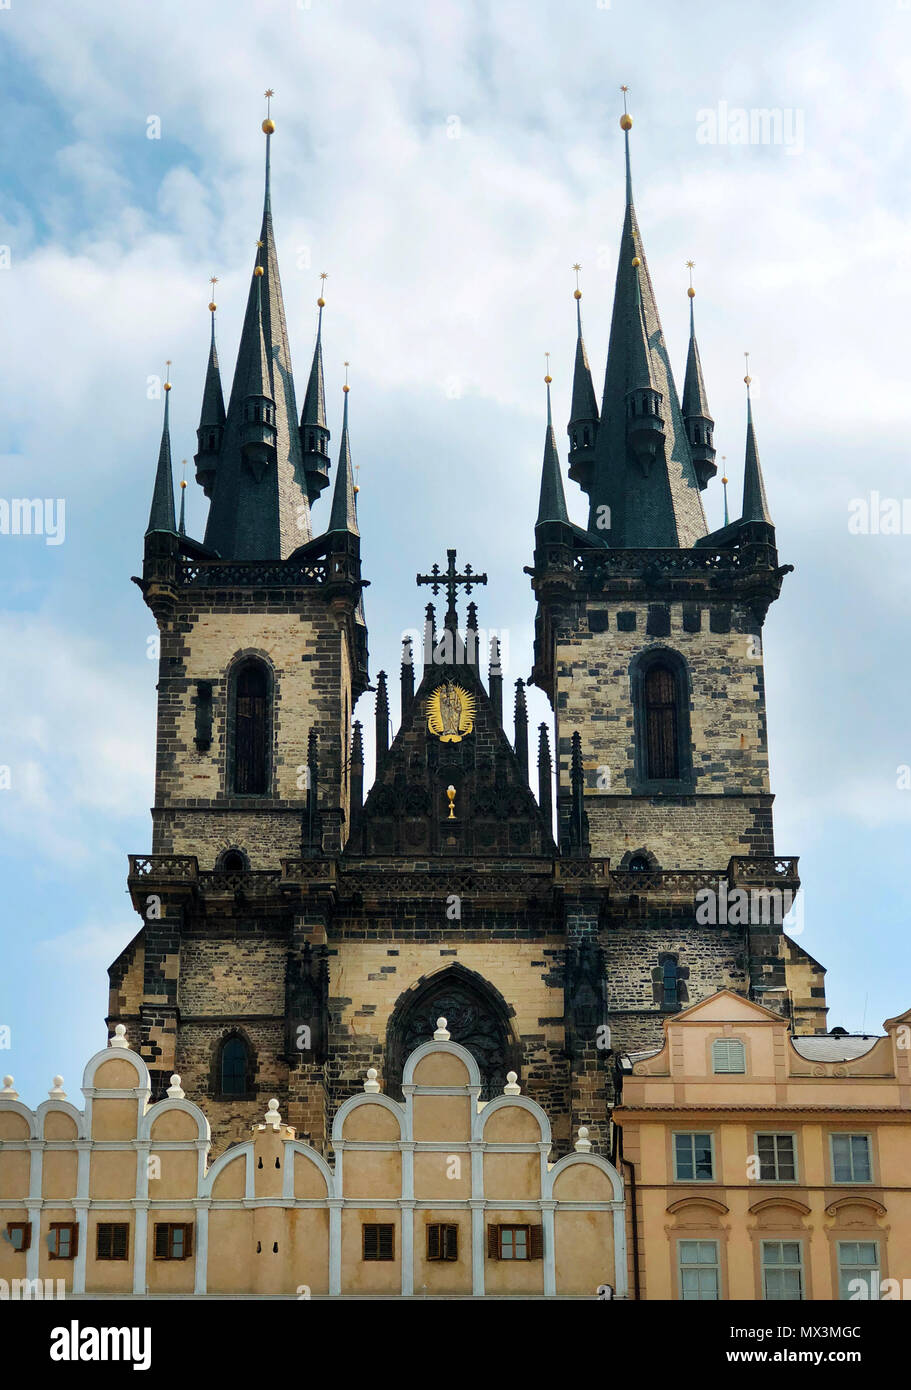 Church of Our Lady Victorious Prague city landmark architecture Stock Photo